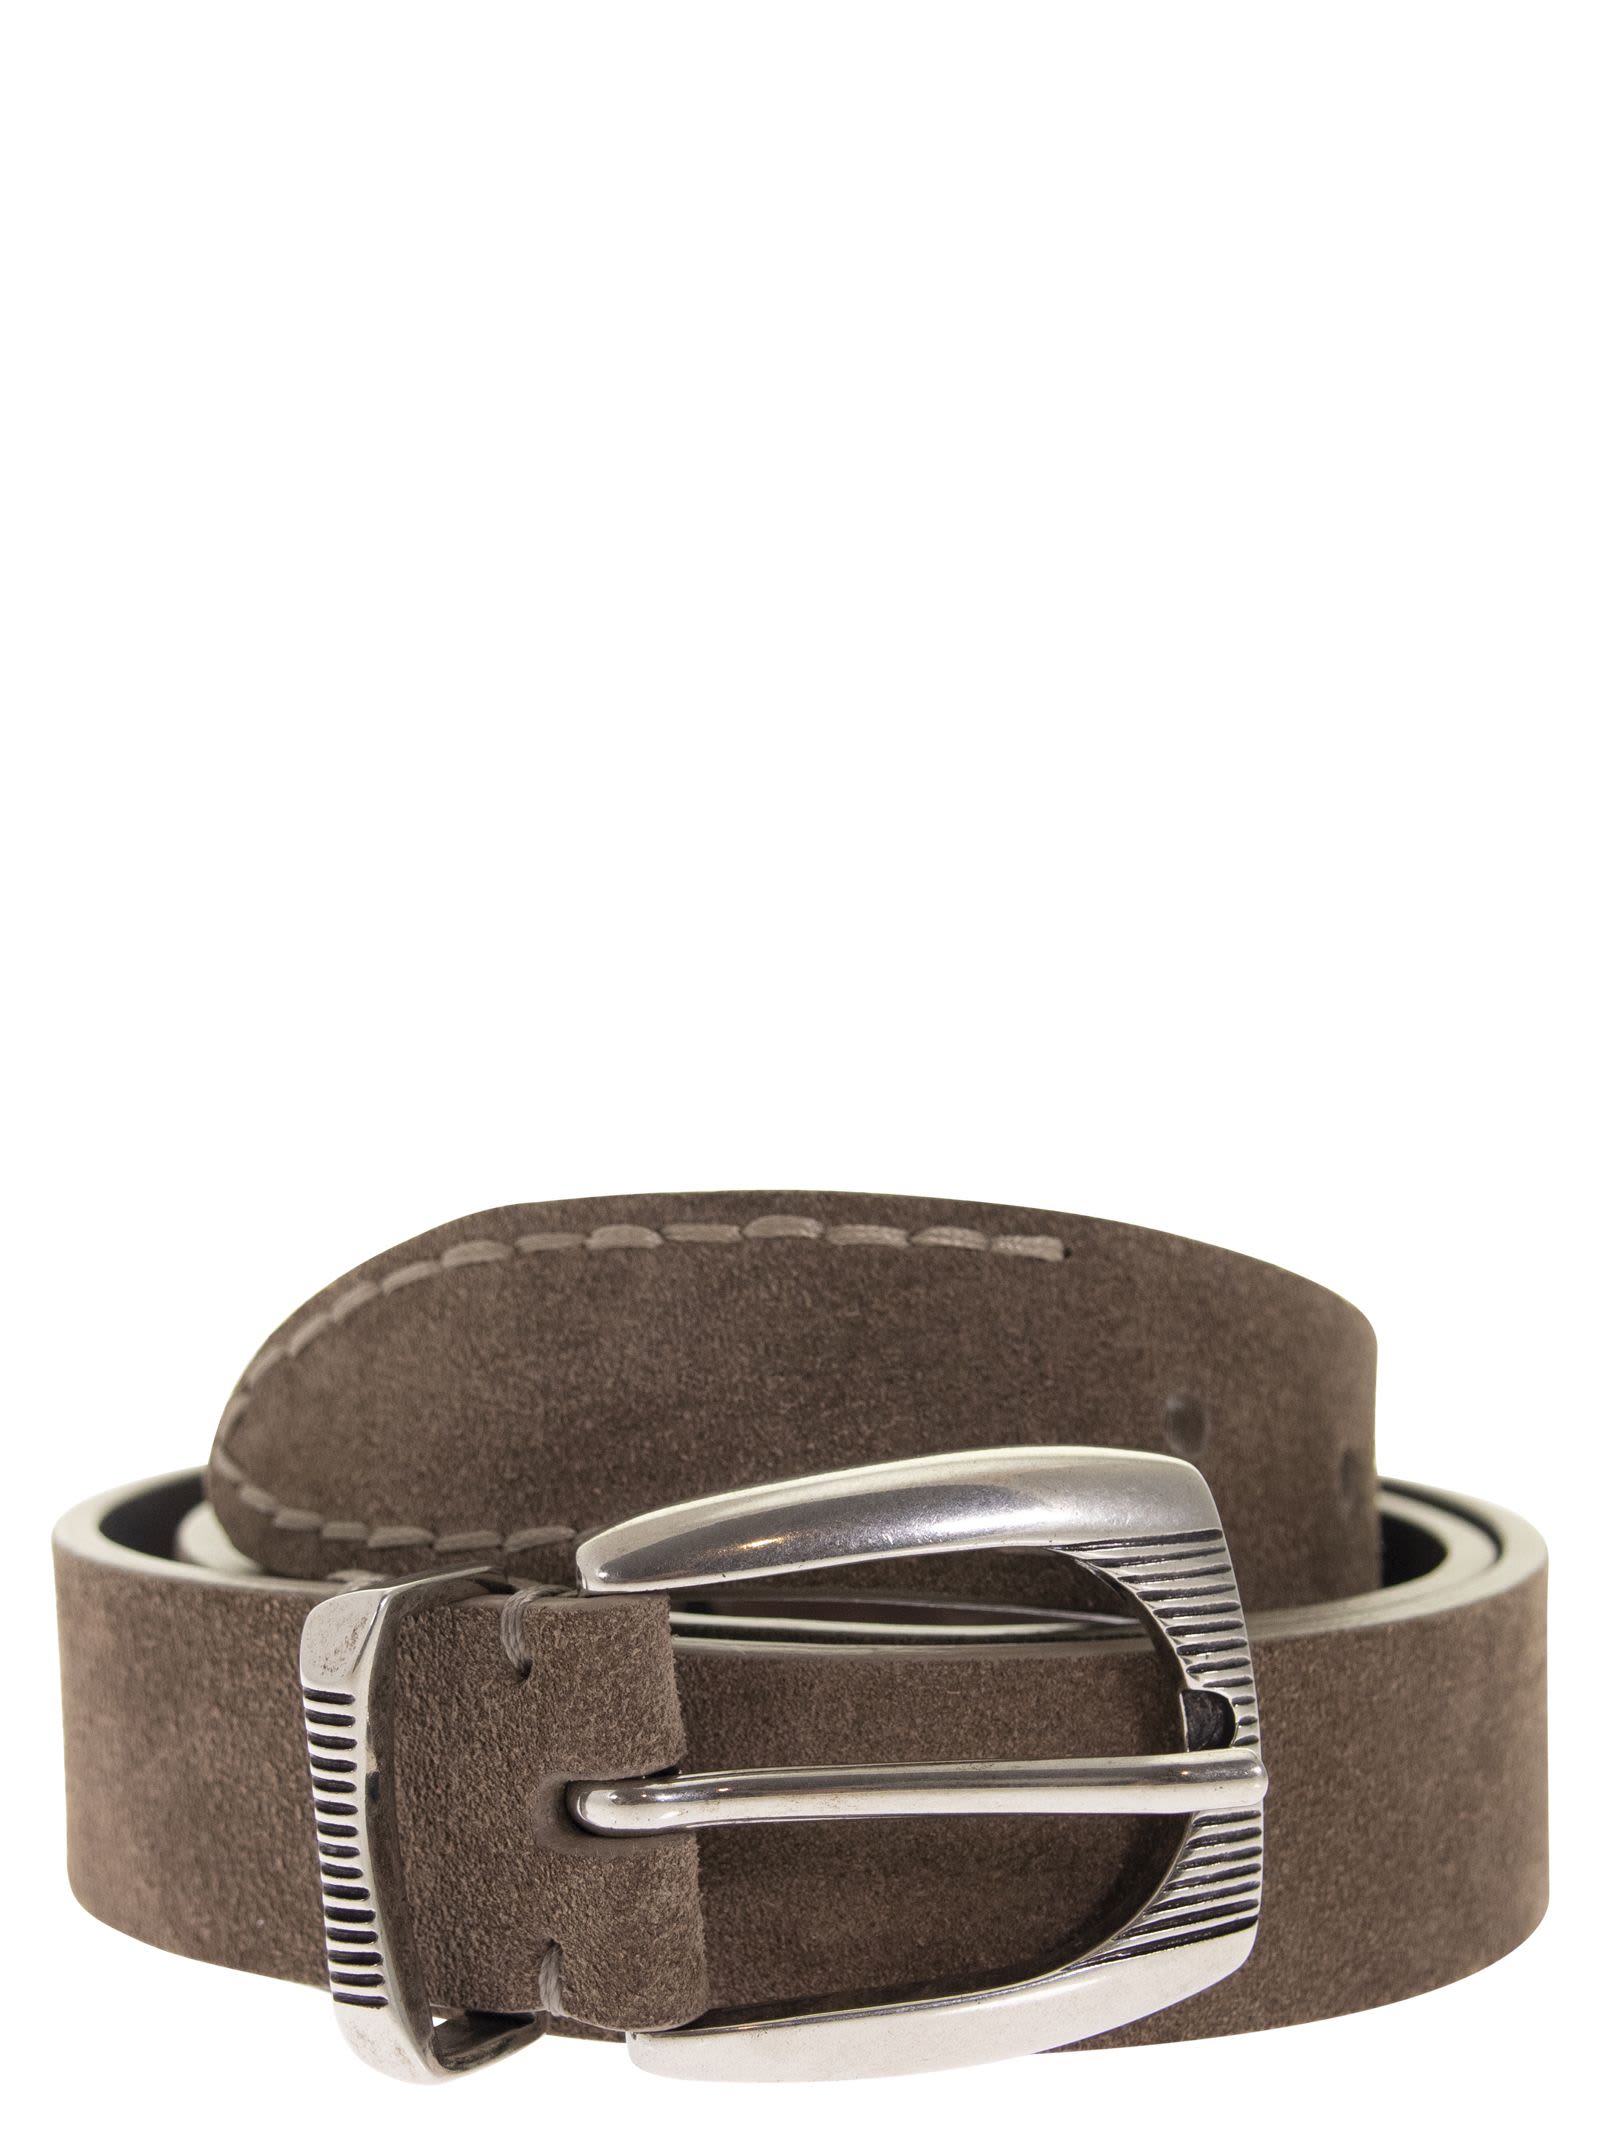 Brunello Cucinelli Reversed Leather Belt With Stitching And Detailed Buckle